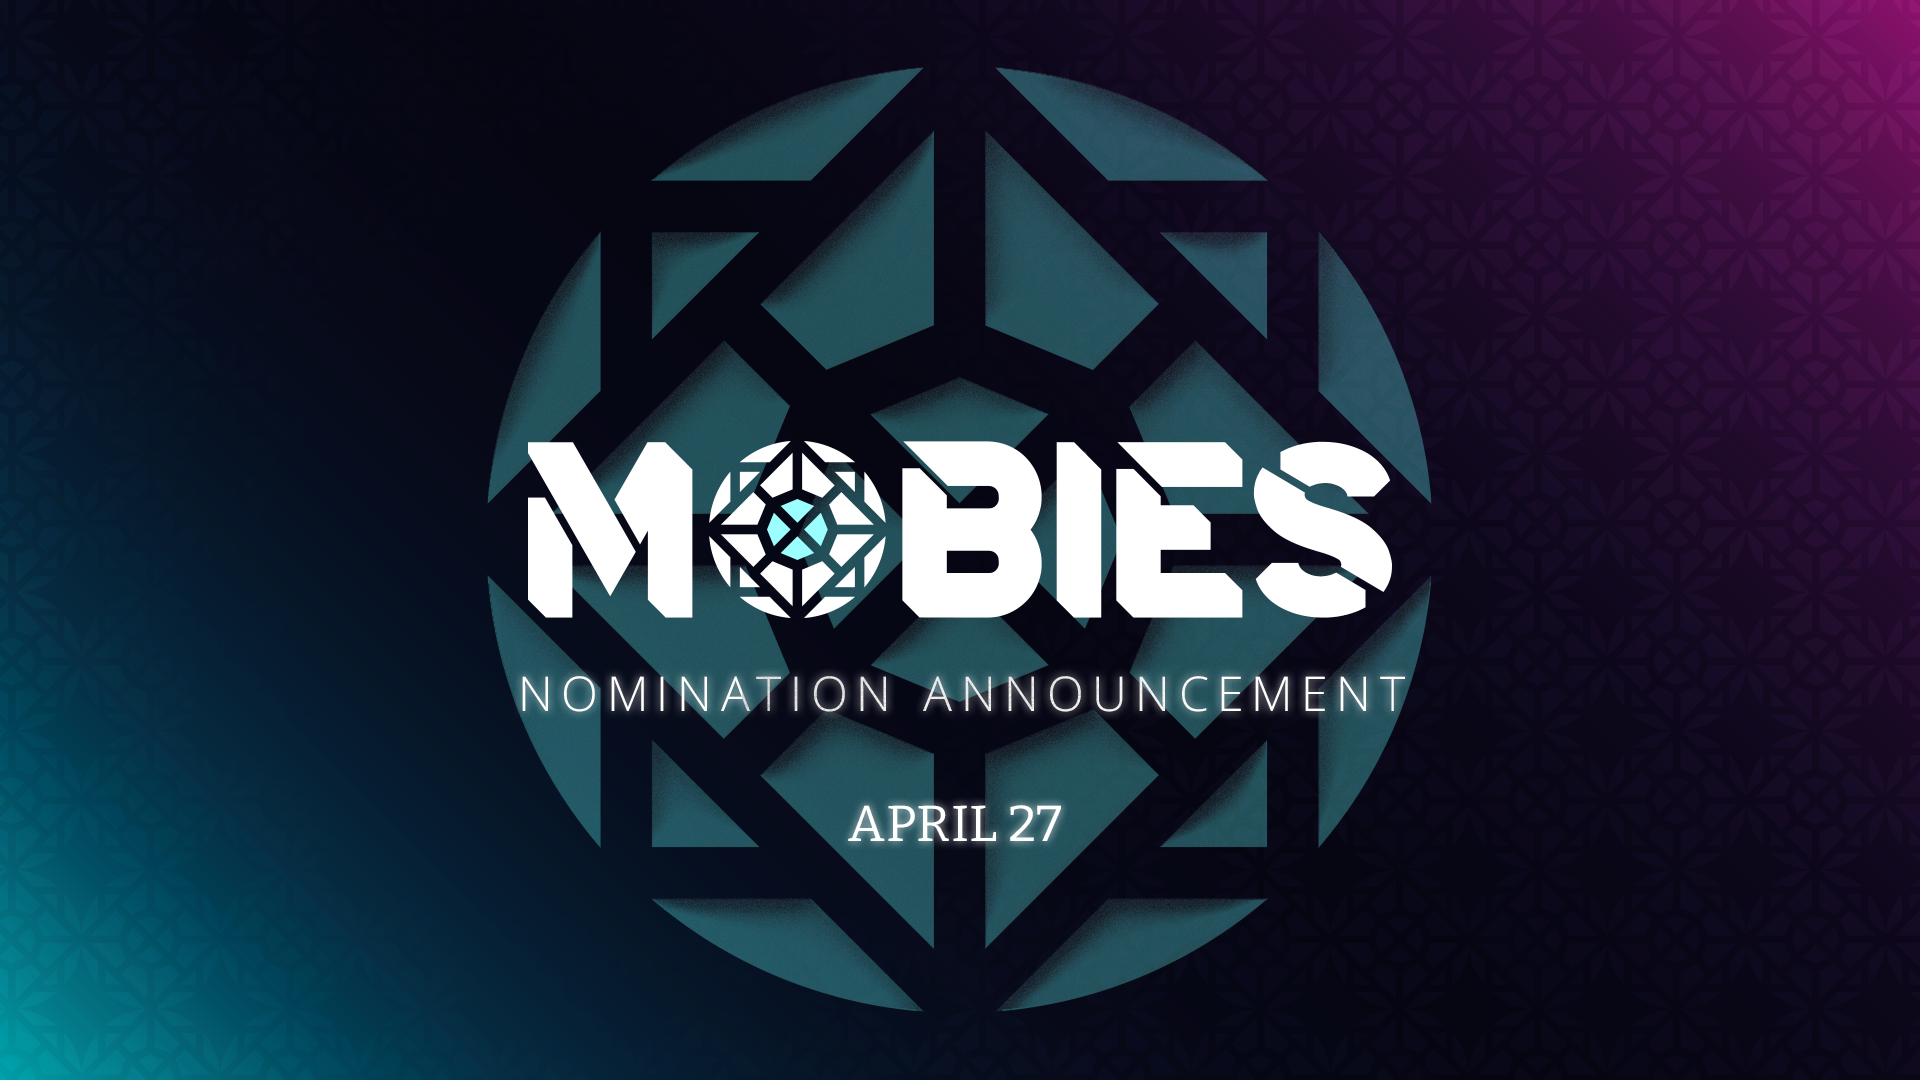 Who are the 2023 nominees? ¦ The Mobies – Press Release